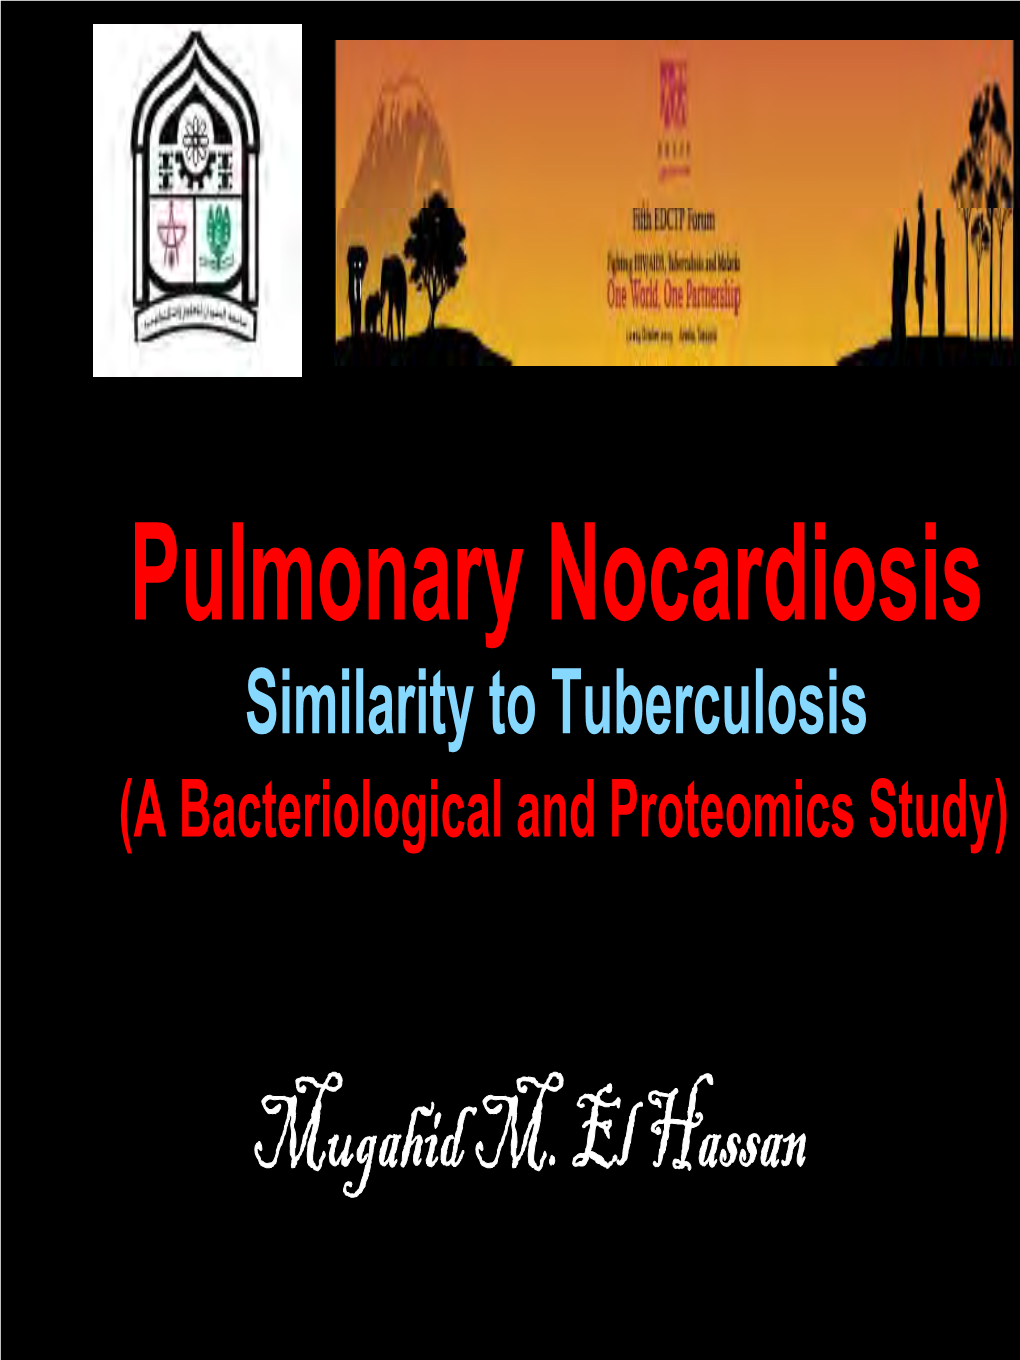 Similarity to Tuberculosis (A Bacteriological and Proteomics Study)